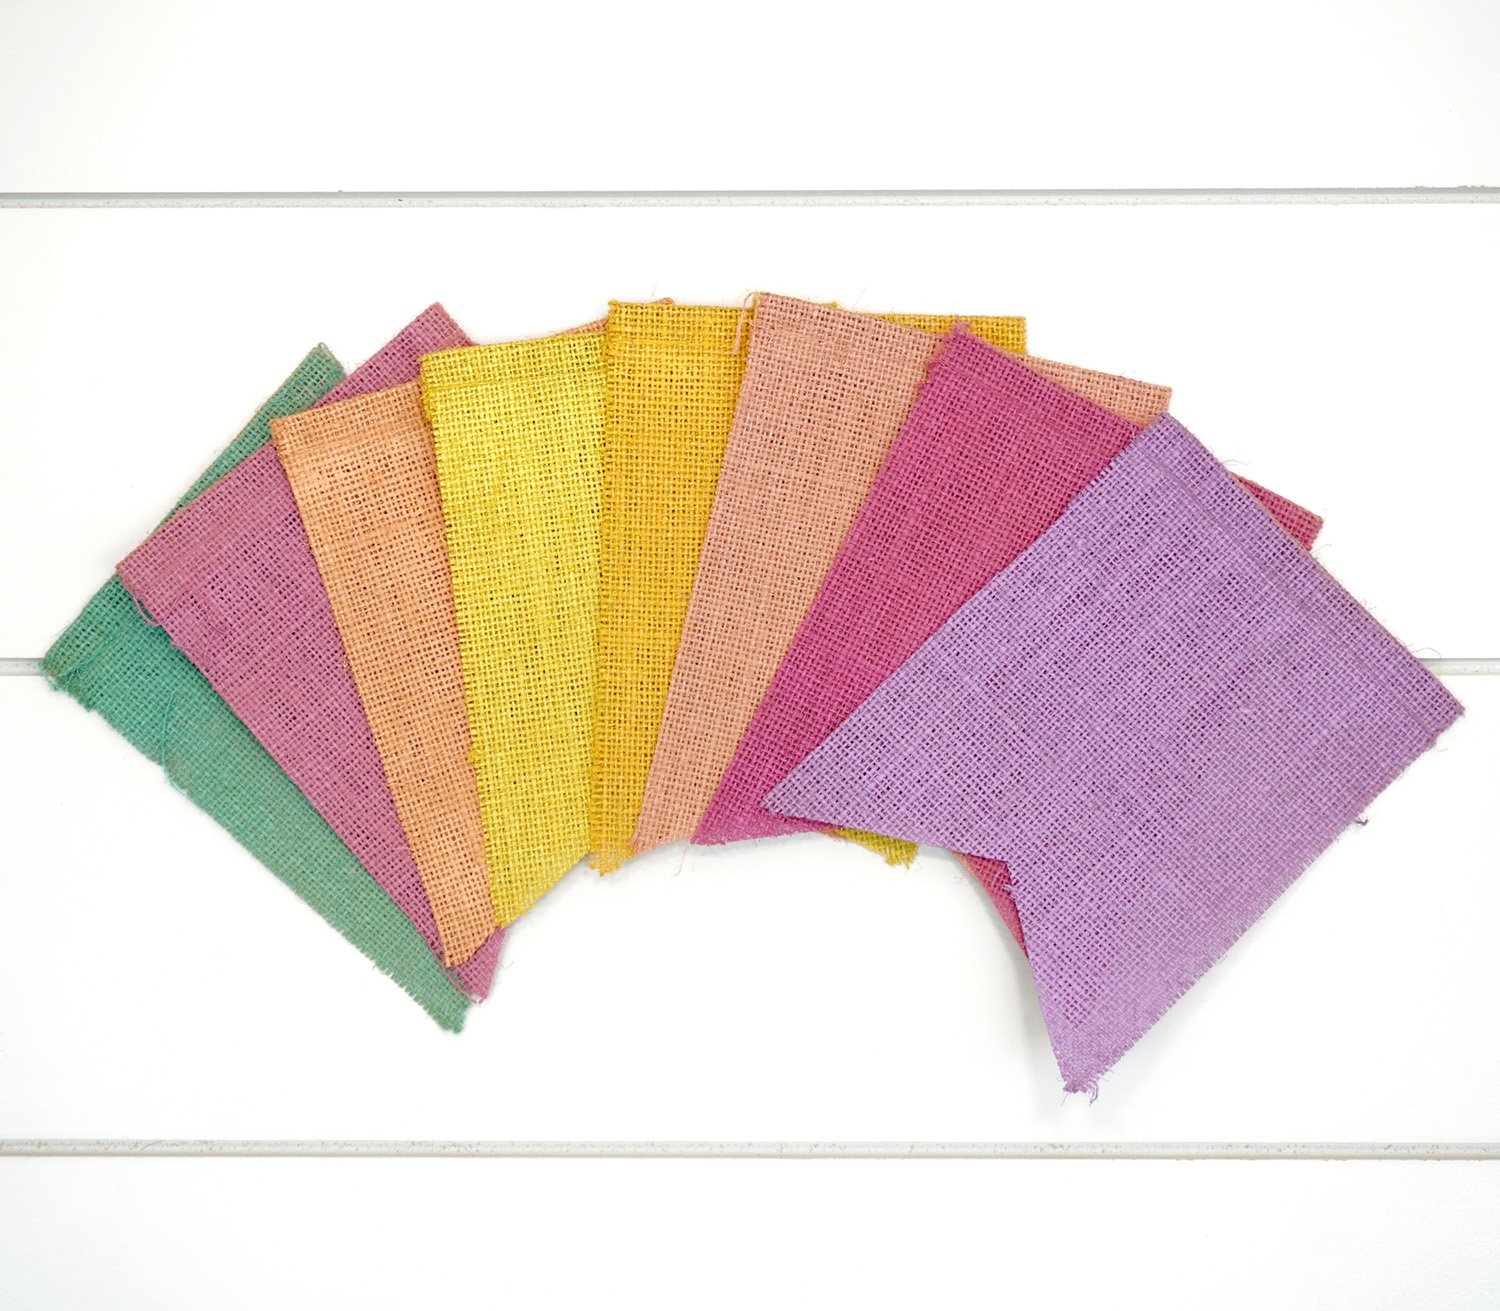 8 colorful burlap banner pieces fanned out on a white background